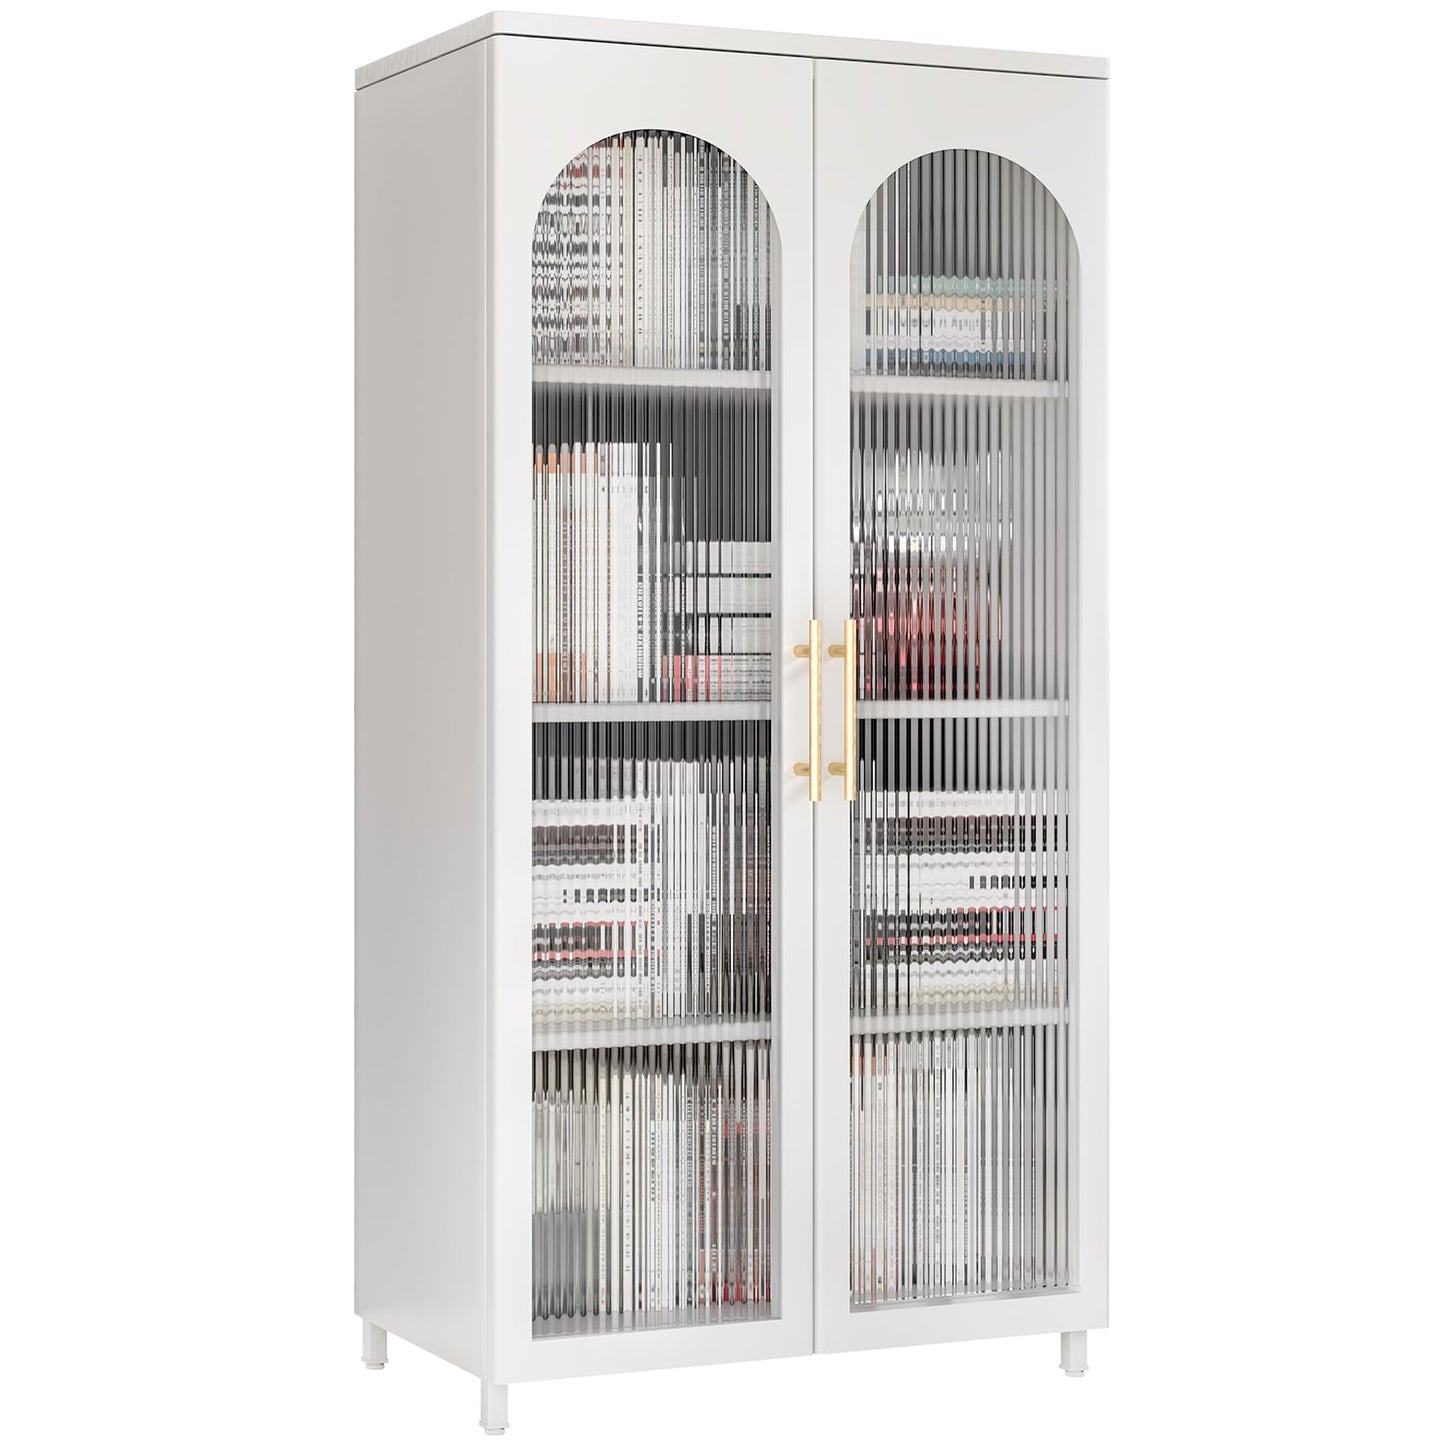 ZONLESON Storage Cabinet with Glass Doors,Metal Cabinet for Living Room,Hallway,Kitchen,Pantry,Glass Cabinet for Display Storage,White Cabinet